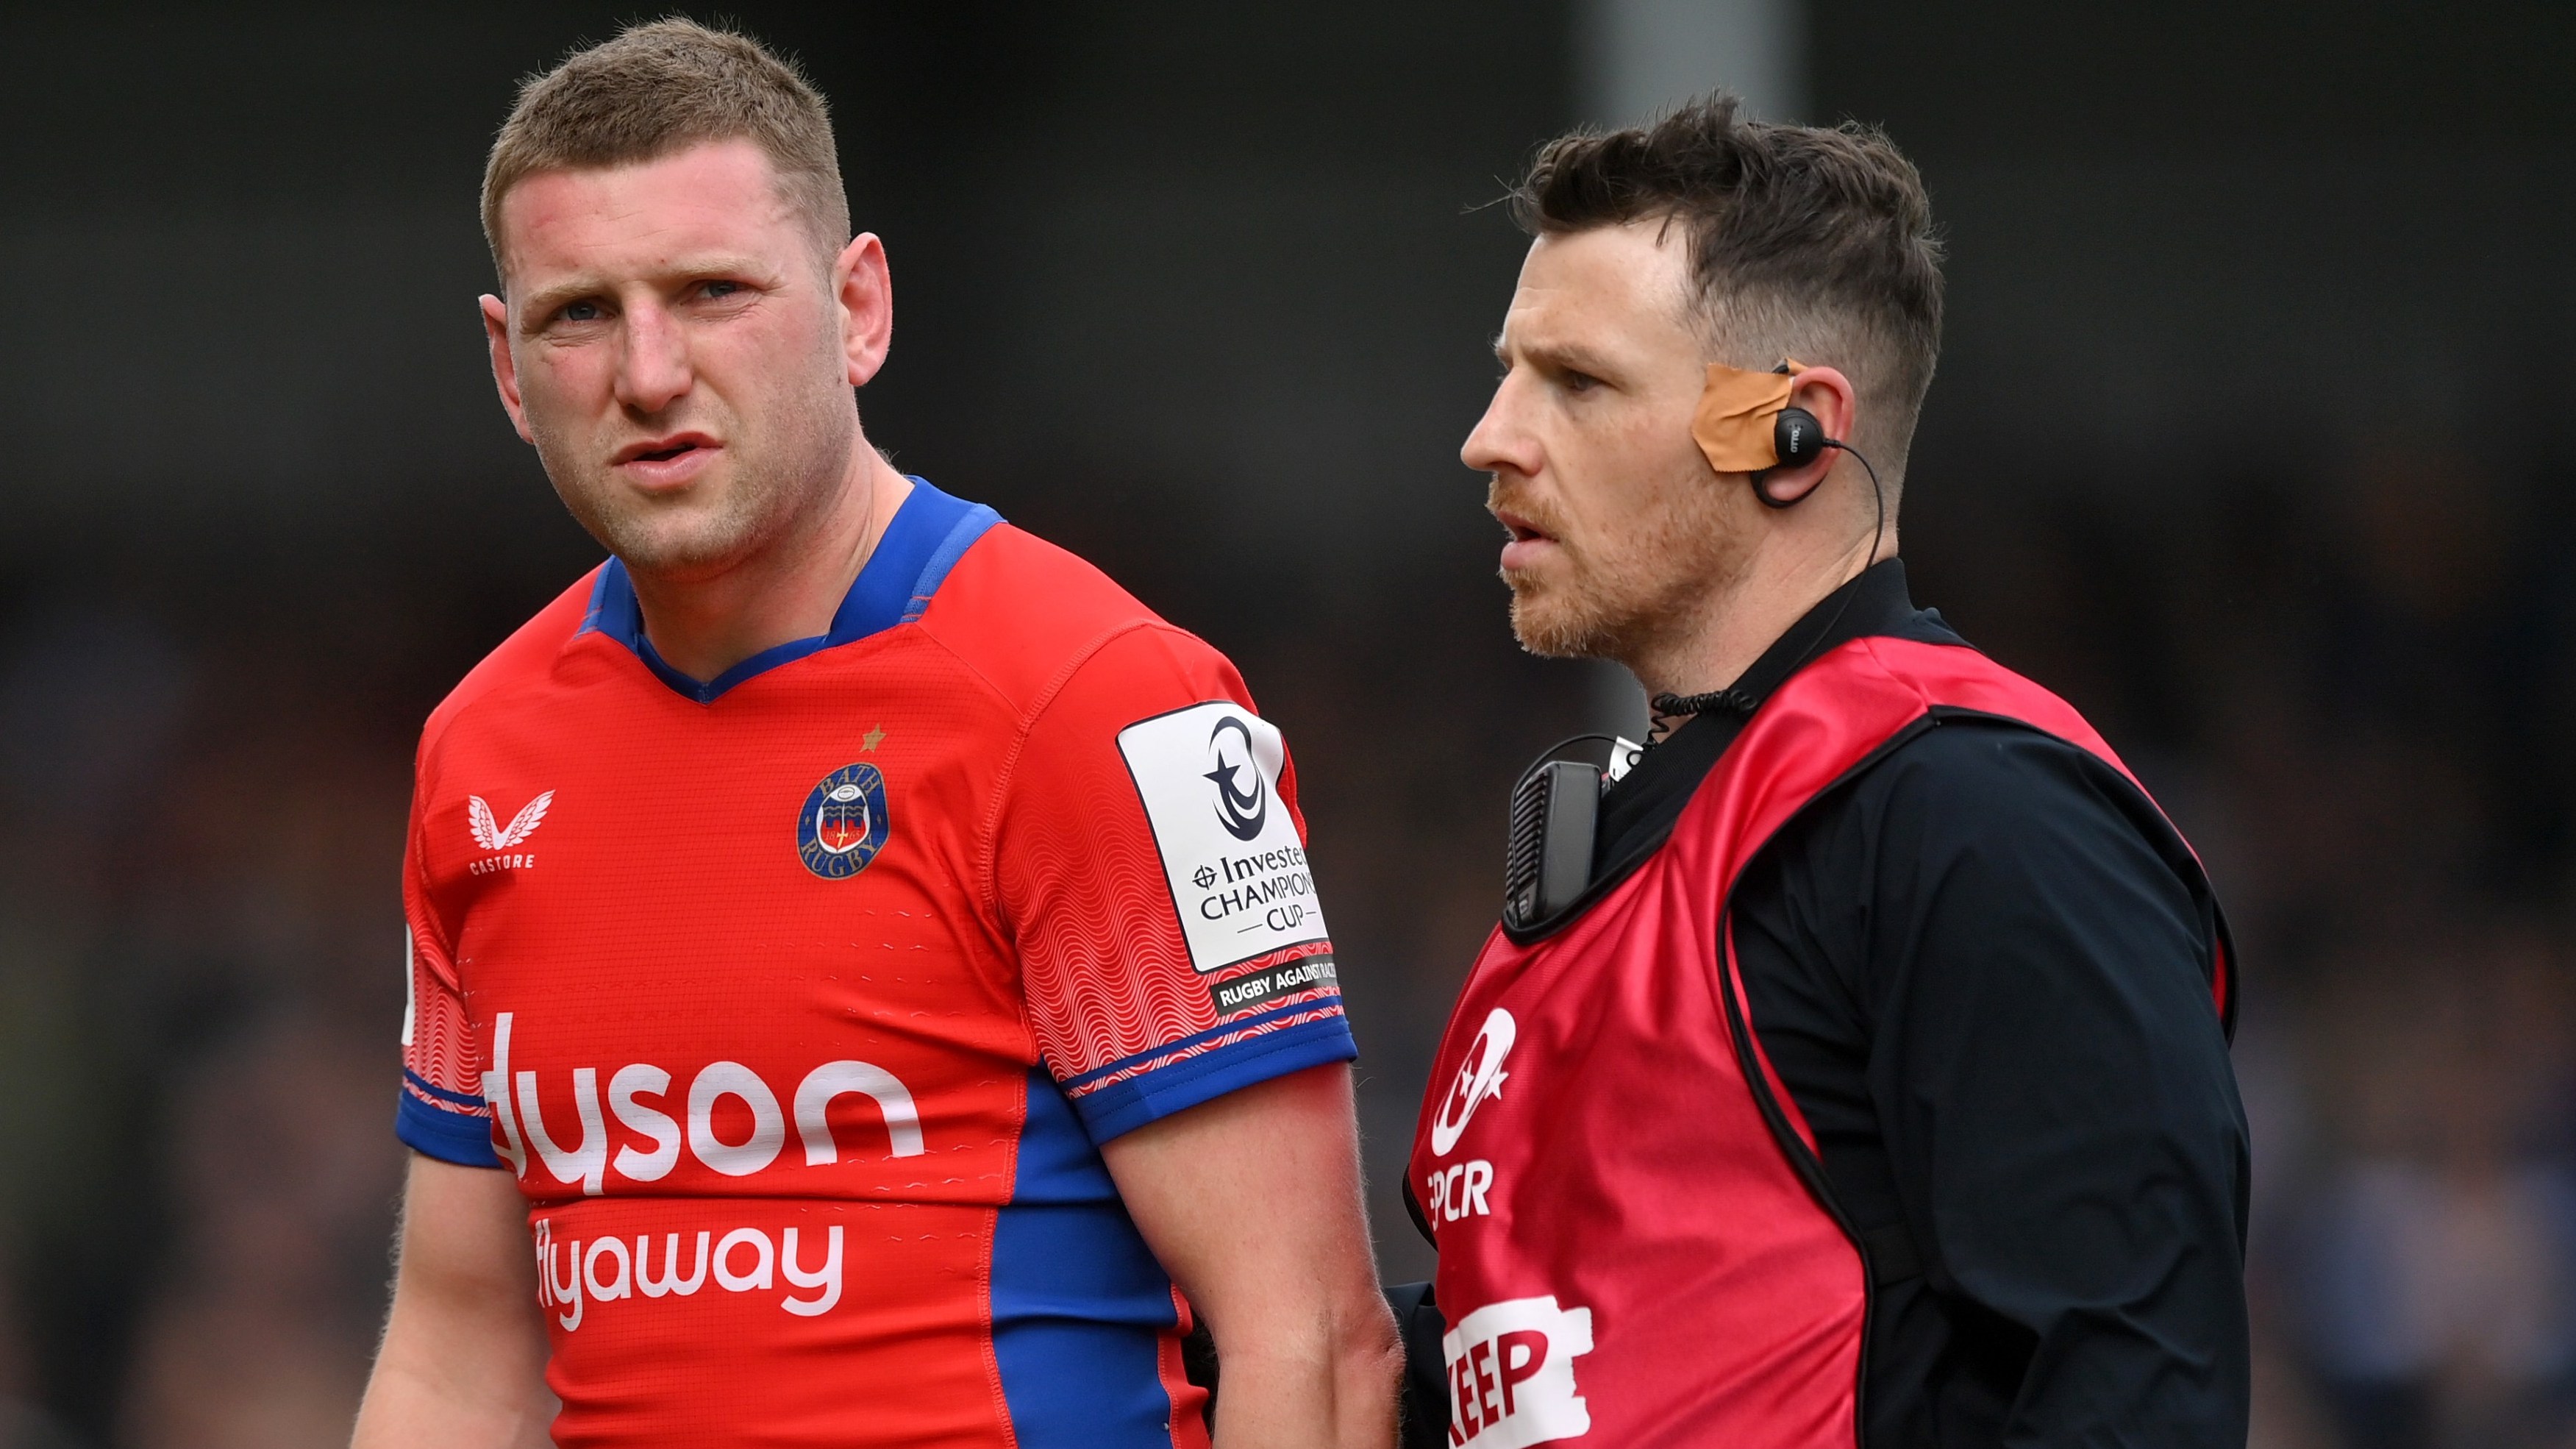 Russell hobbled off against Exeter on April 6